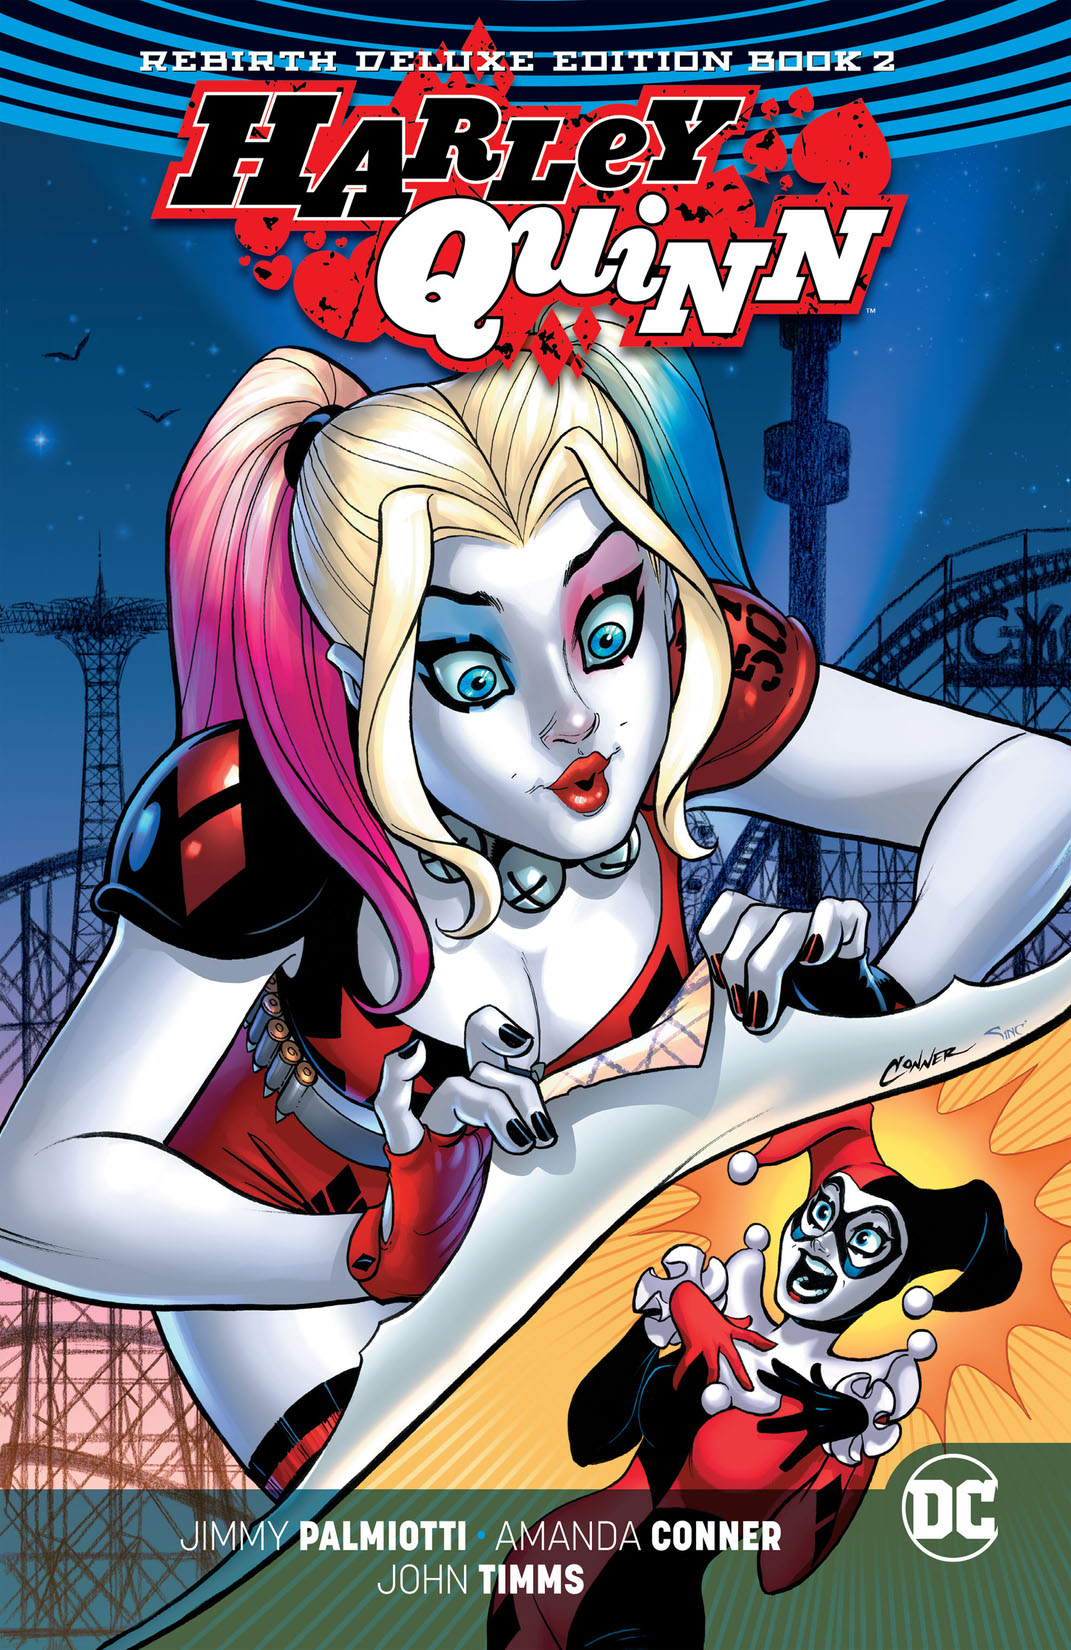 Harley Quinn: The Rebirth Deluxe Edition Book 2 preview images